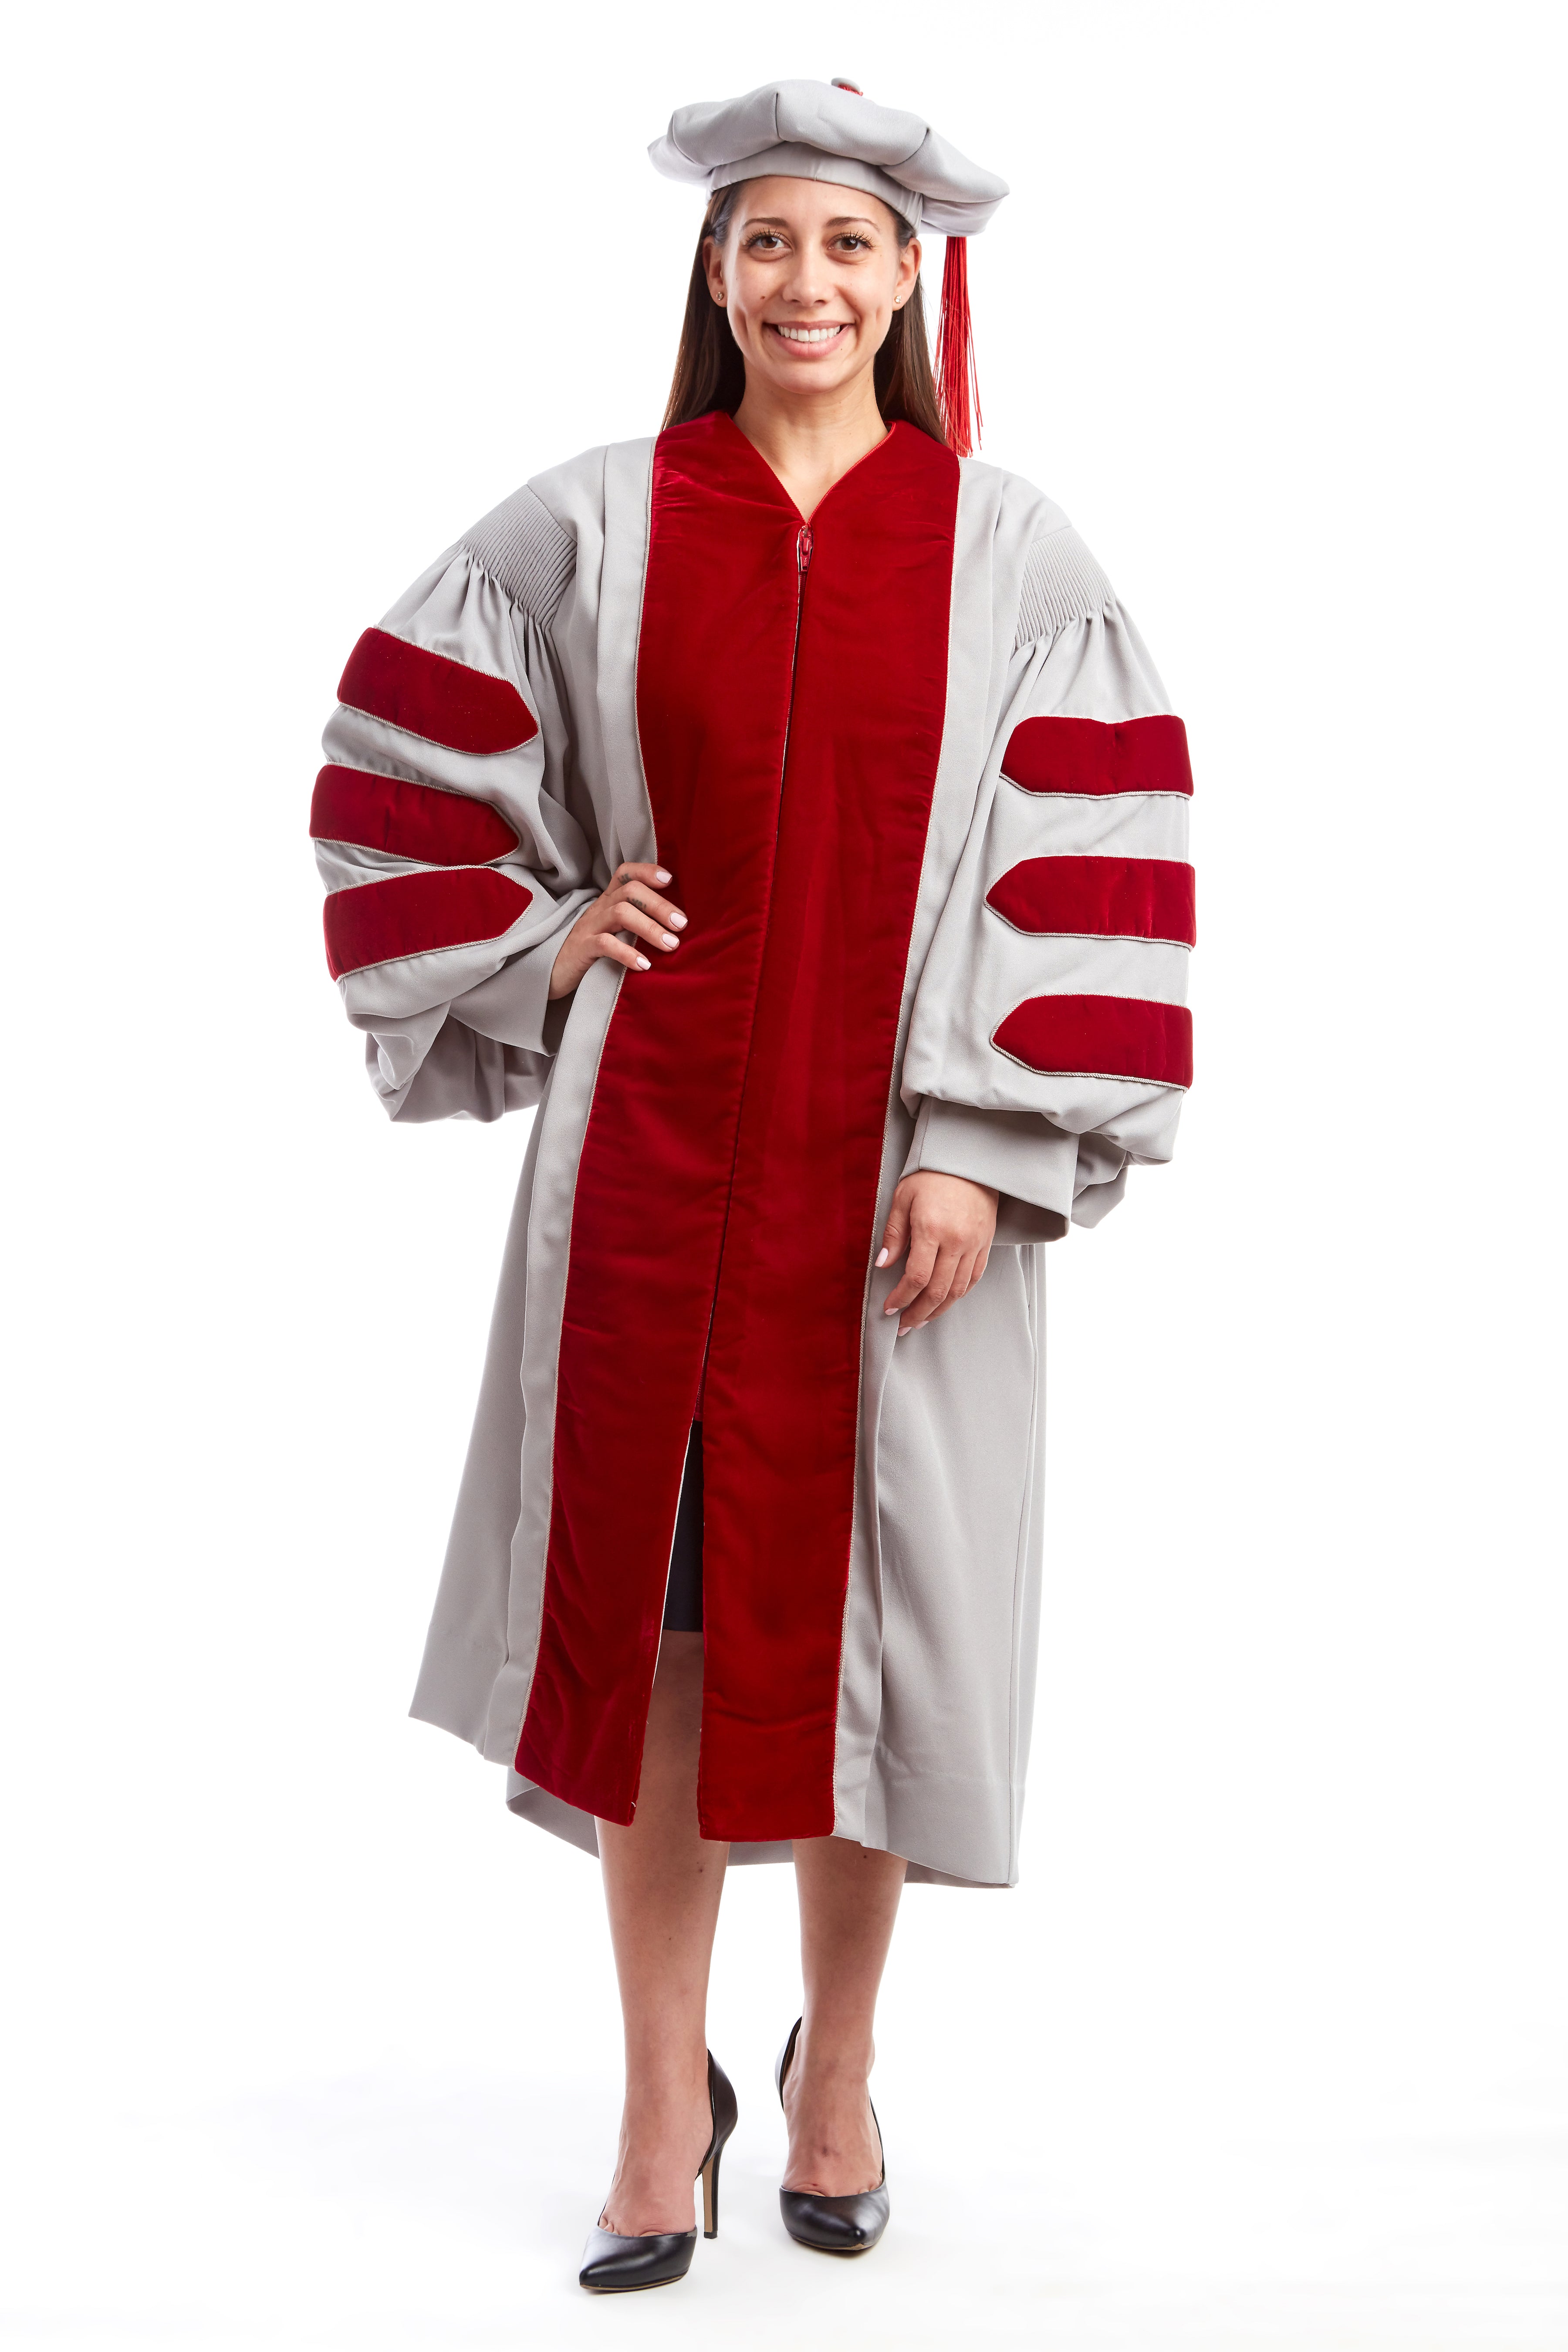 MIT Doctoral Rental Regalia Set. Premium Grey and Cardinal Red Gown with Eight-Sided Cap/Tam including Red Tassel